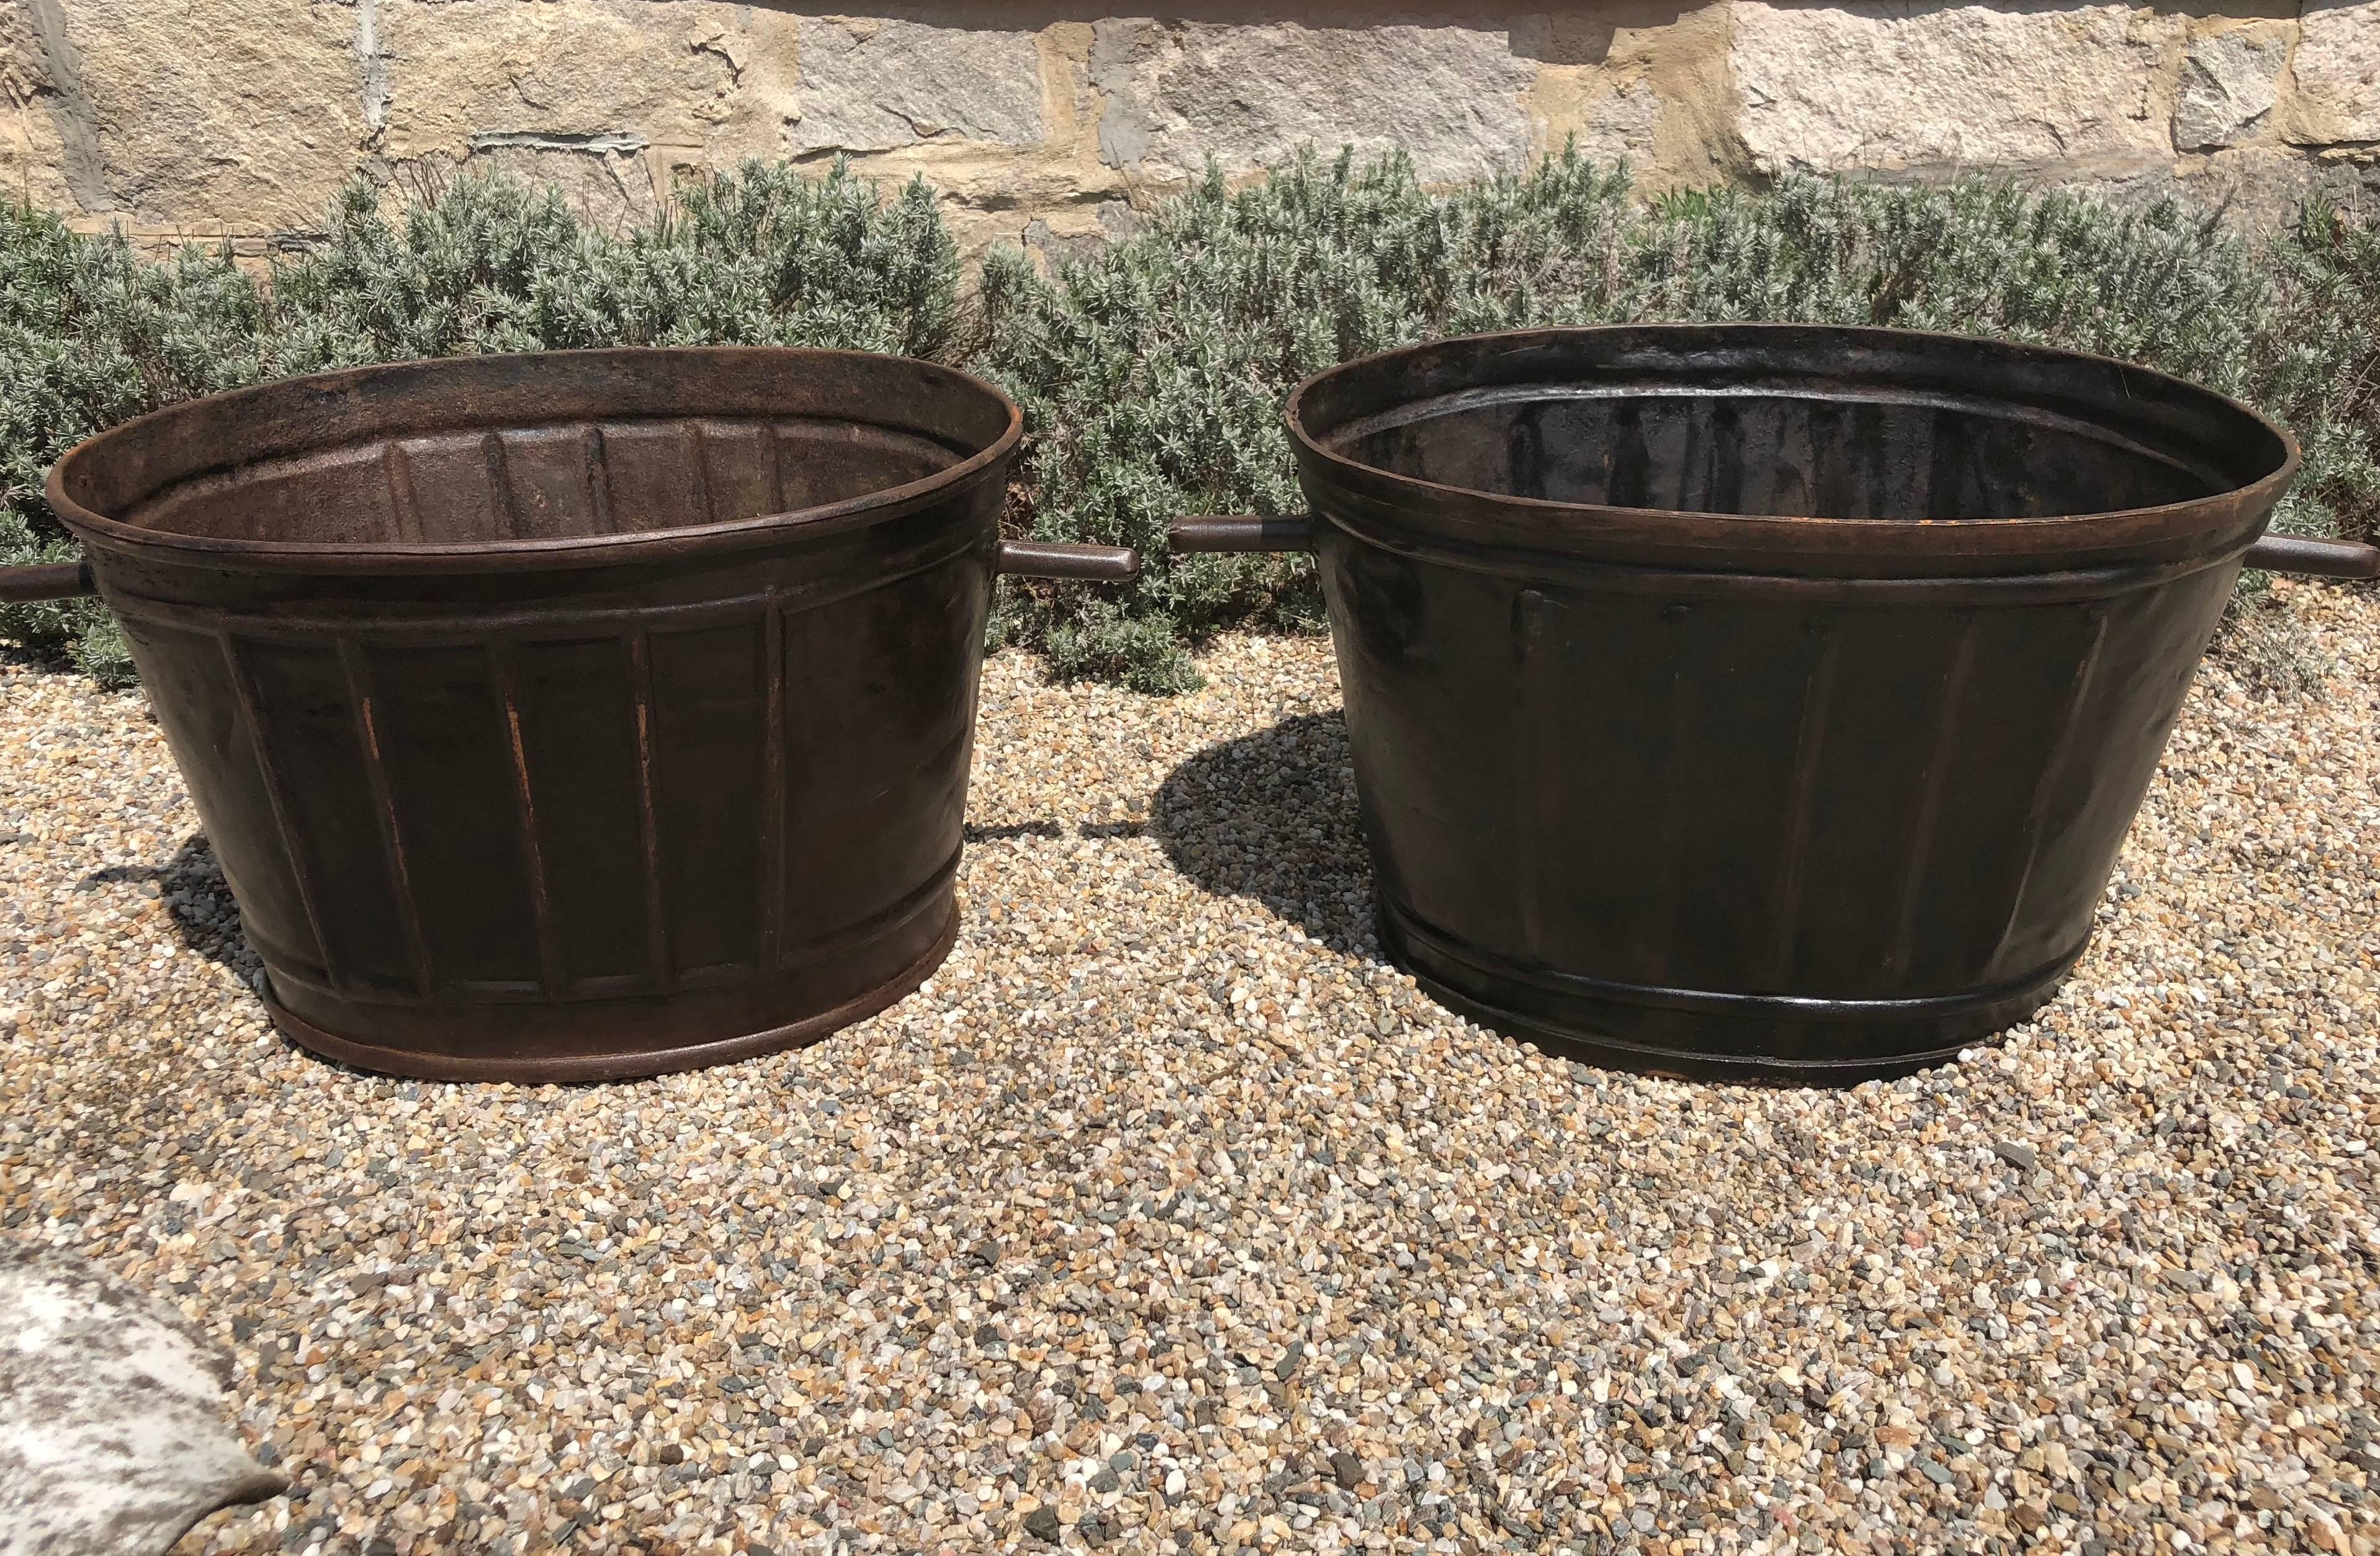 This pair of steel wine-harvest buckets has been burnished to a stunning patina and would make wonderful planters or accessories in your wine cellar. From Burgundy, they both have a wonderful raised diamond-shaped design on the exterior and are